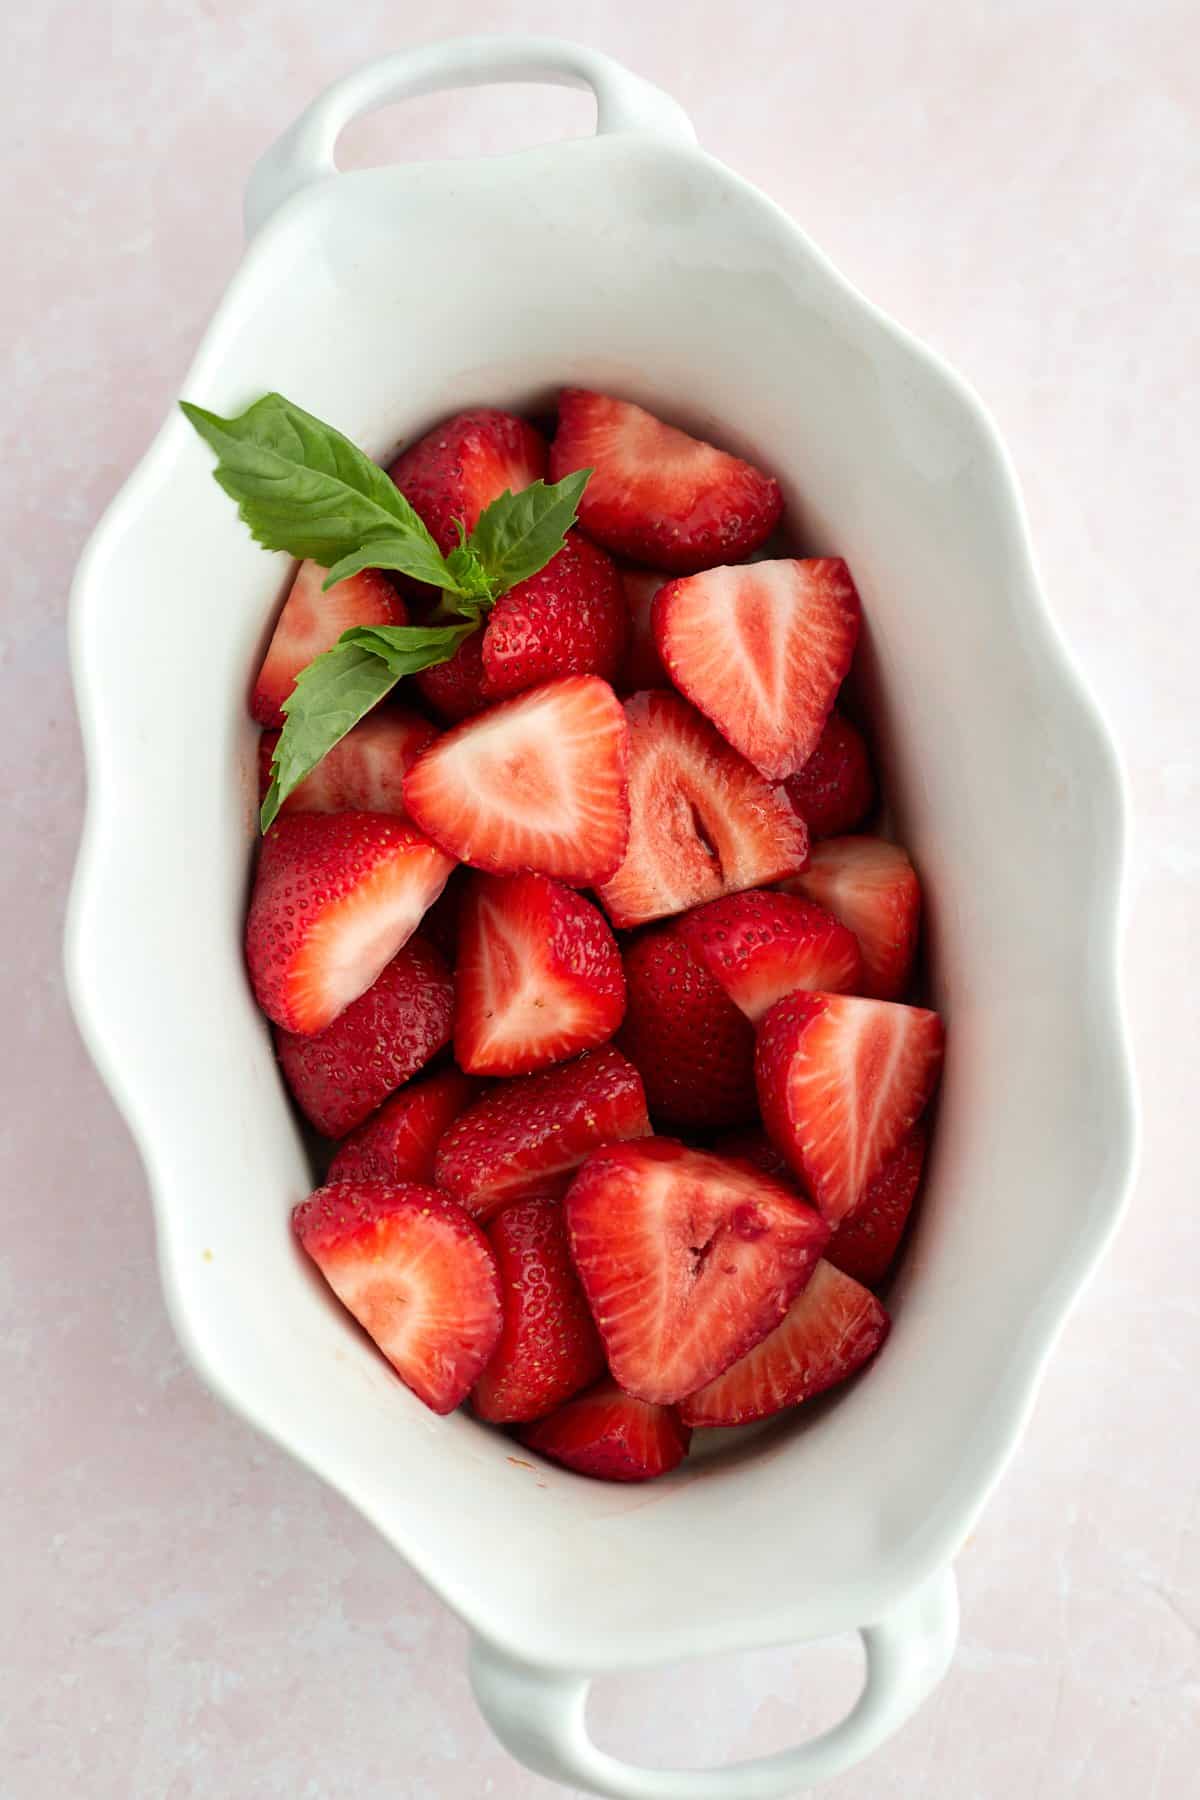 Strawberries in a baking dish with fresh basil